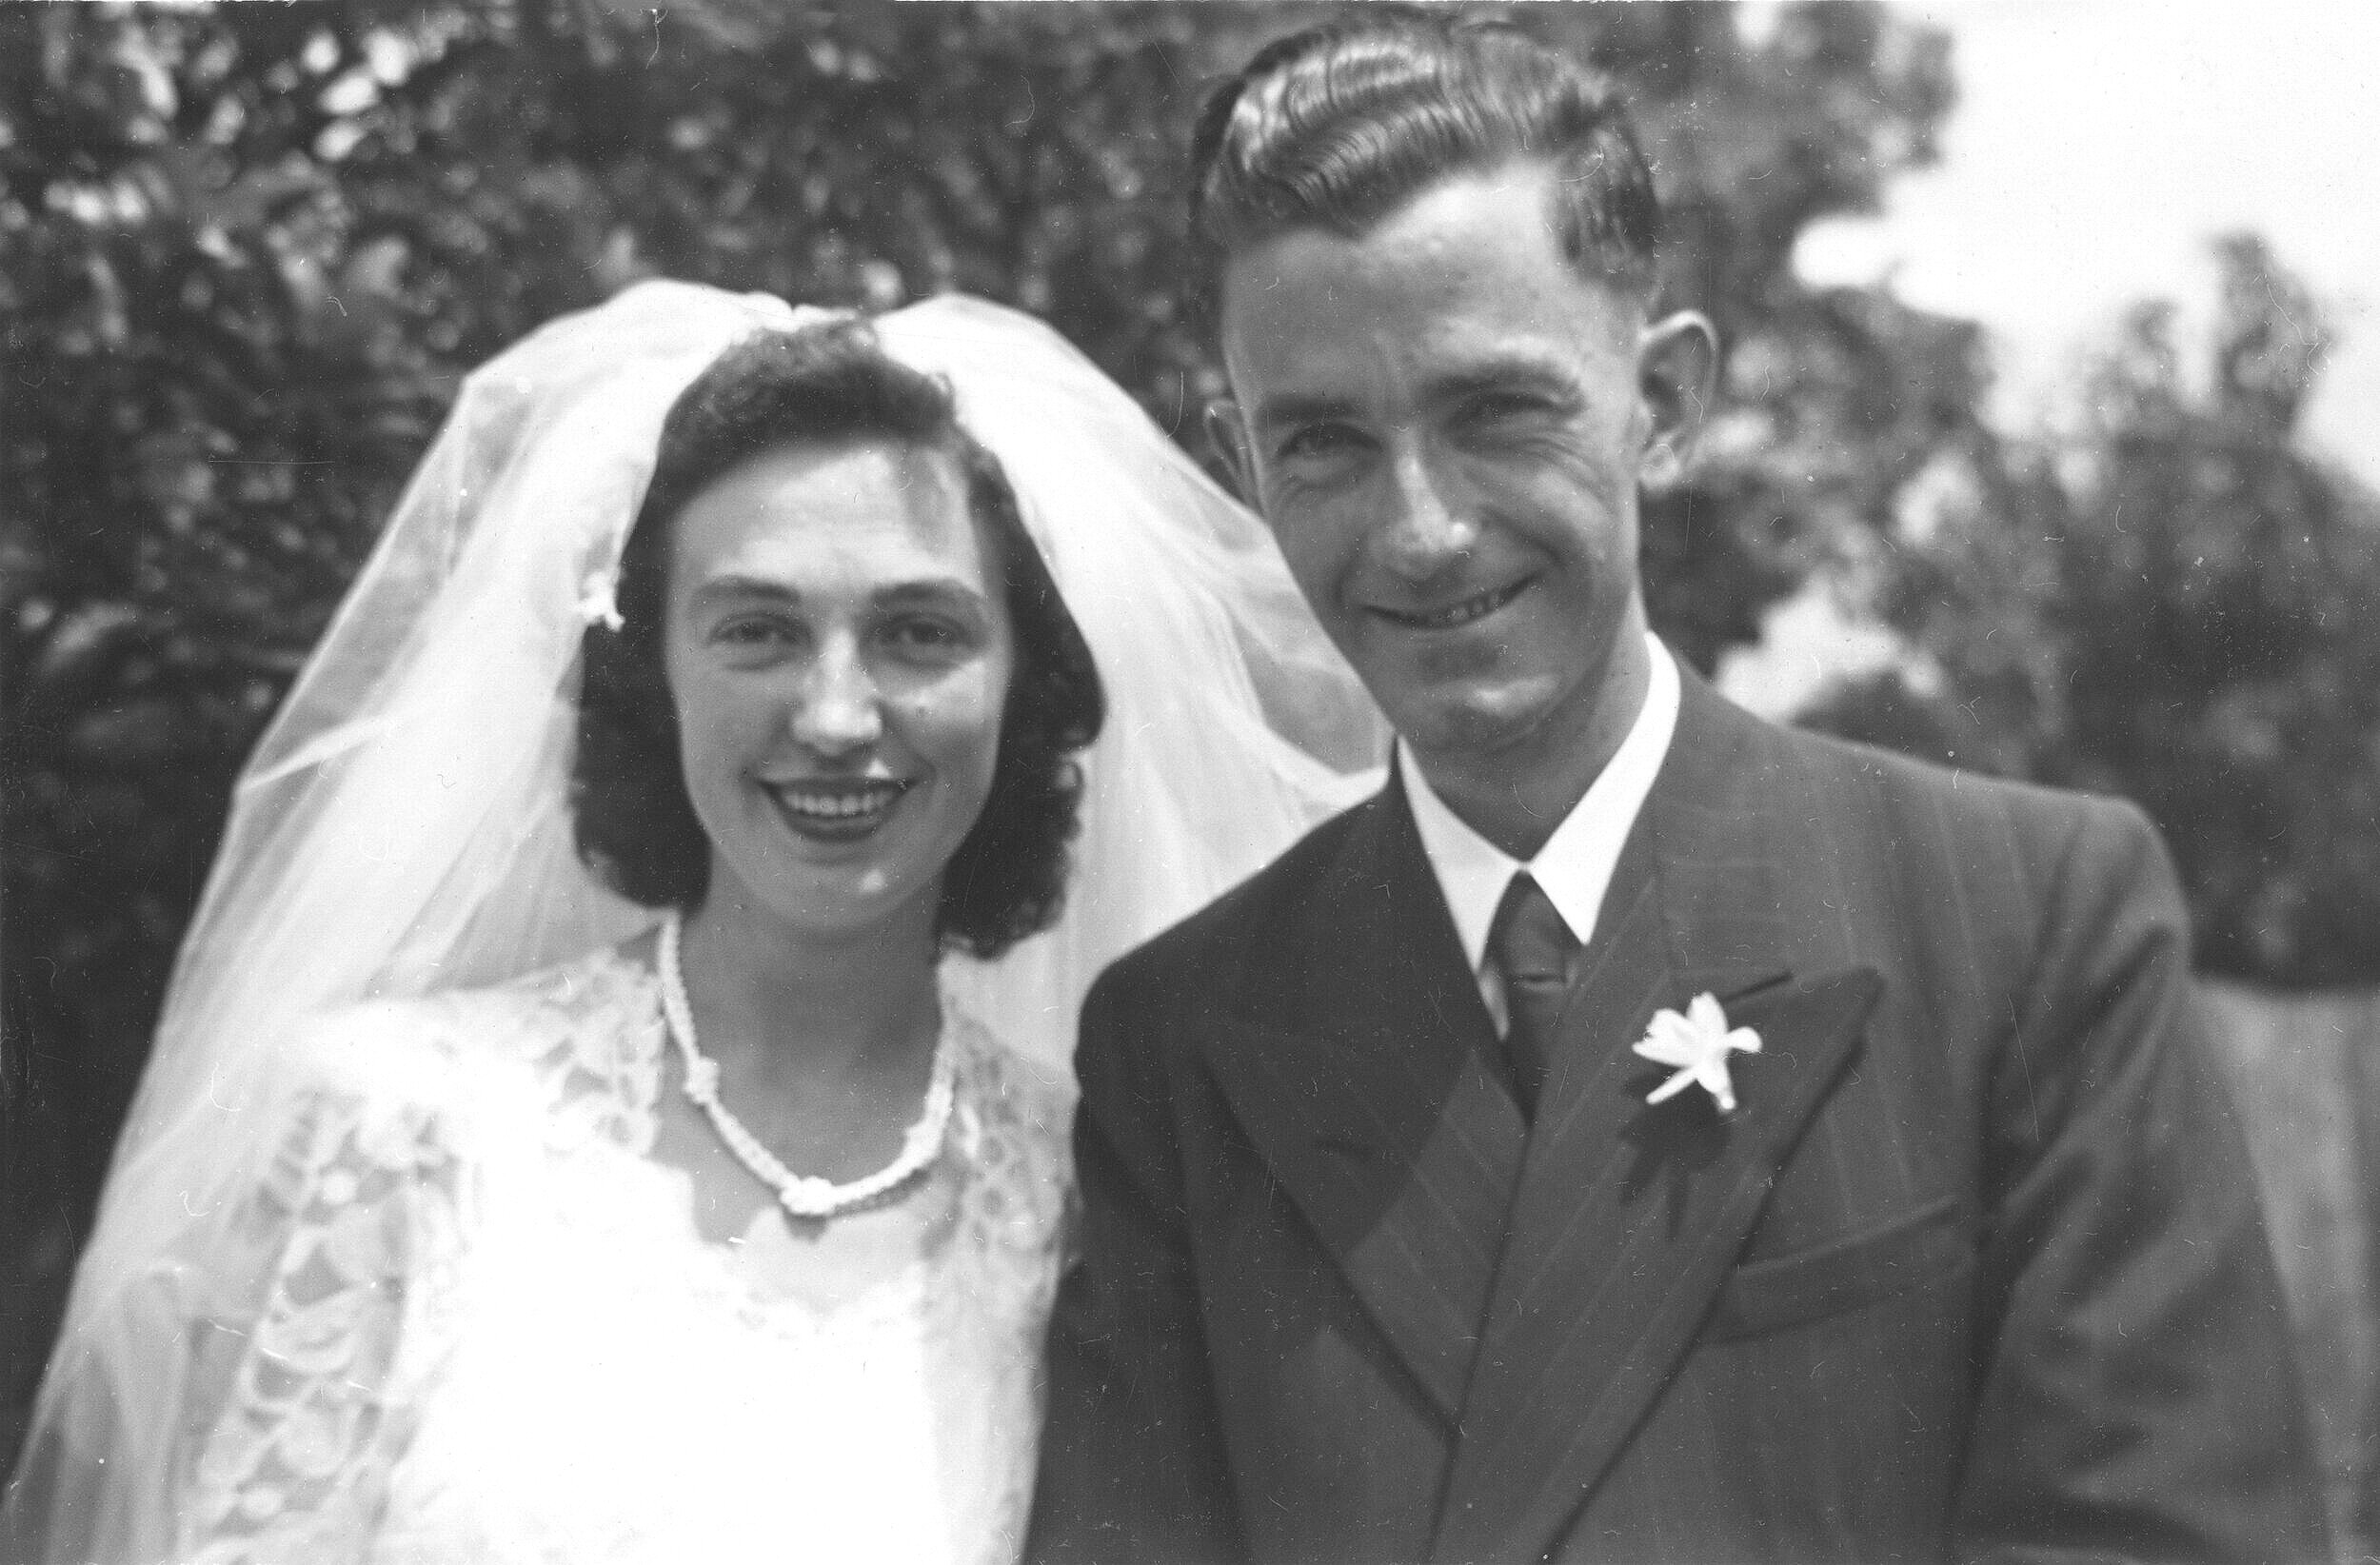 My grandparents, John and Pat Souter, at their wedding in Sydney on 27 January, 1951.